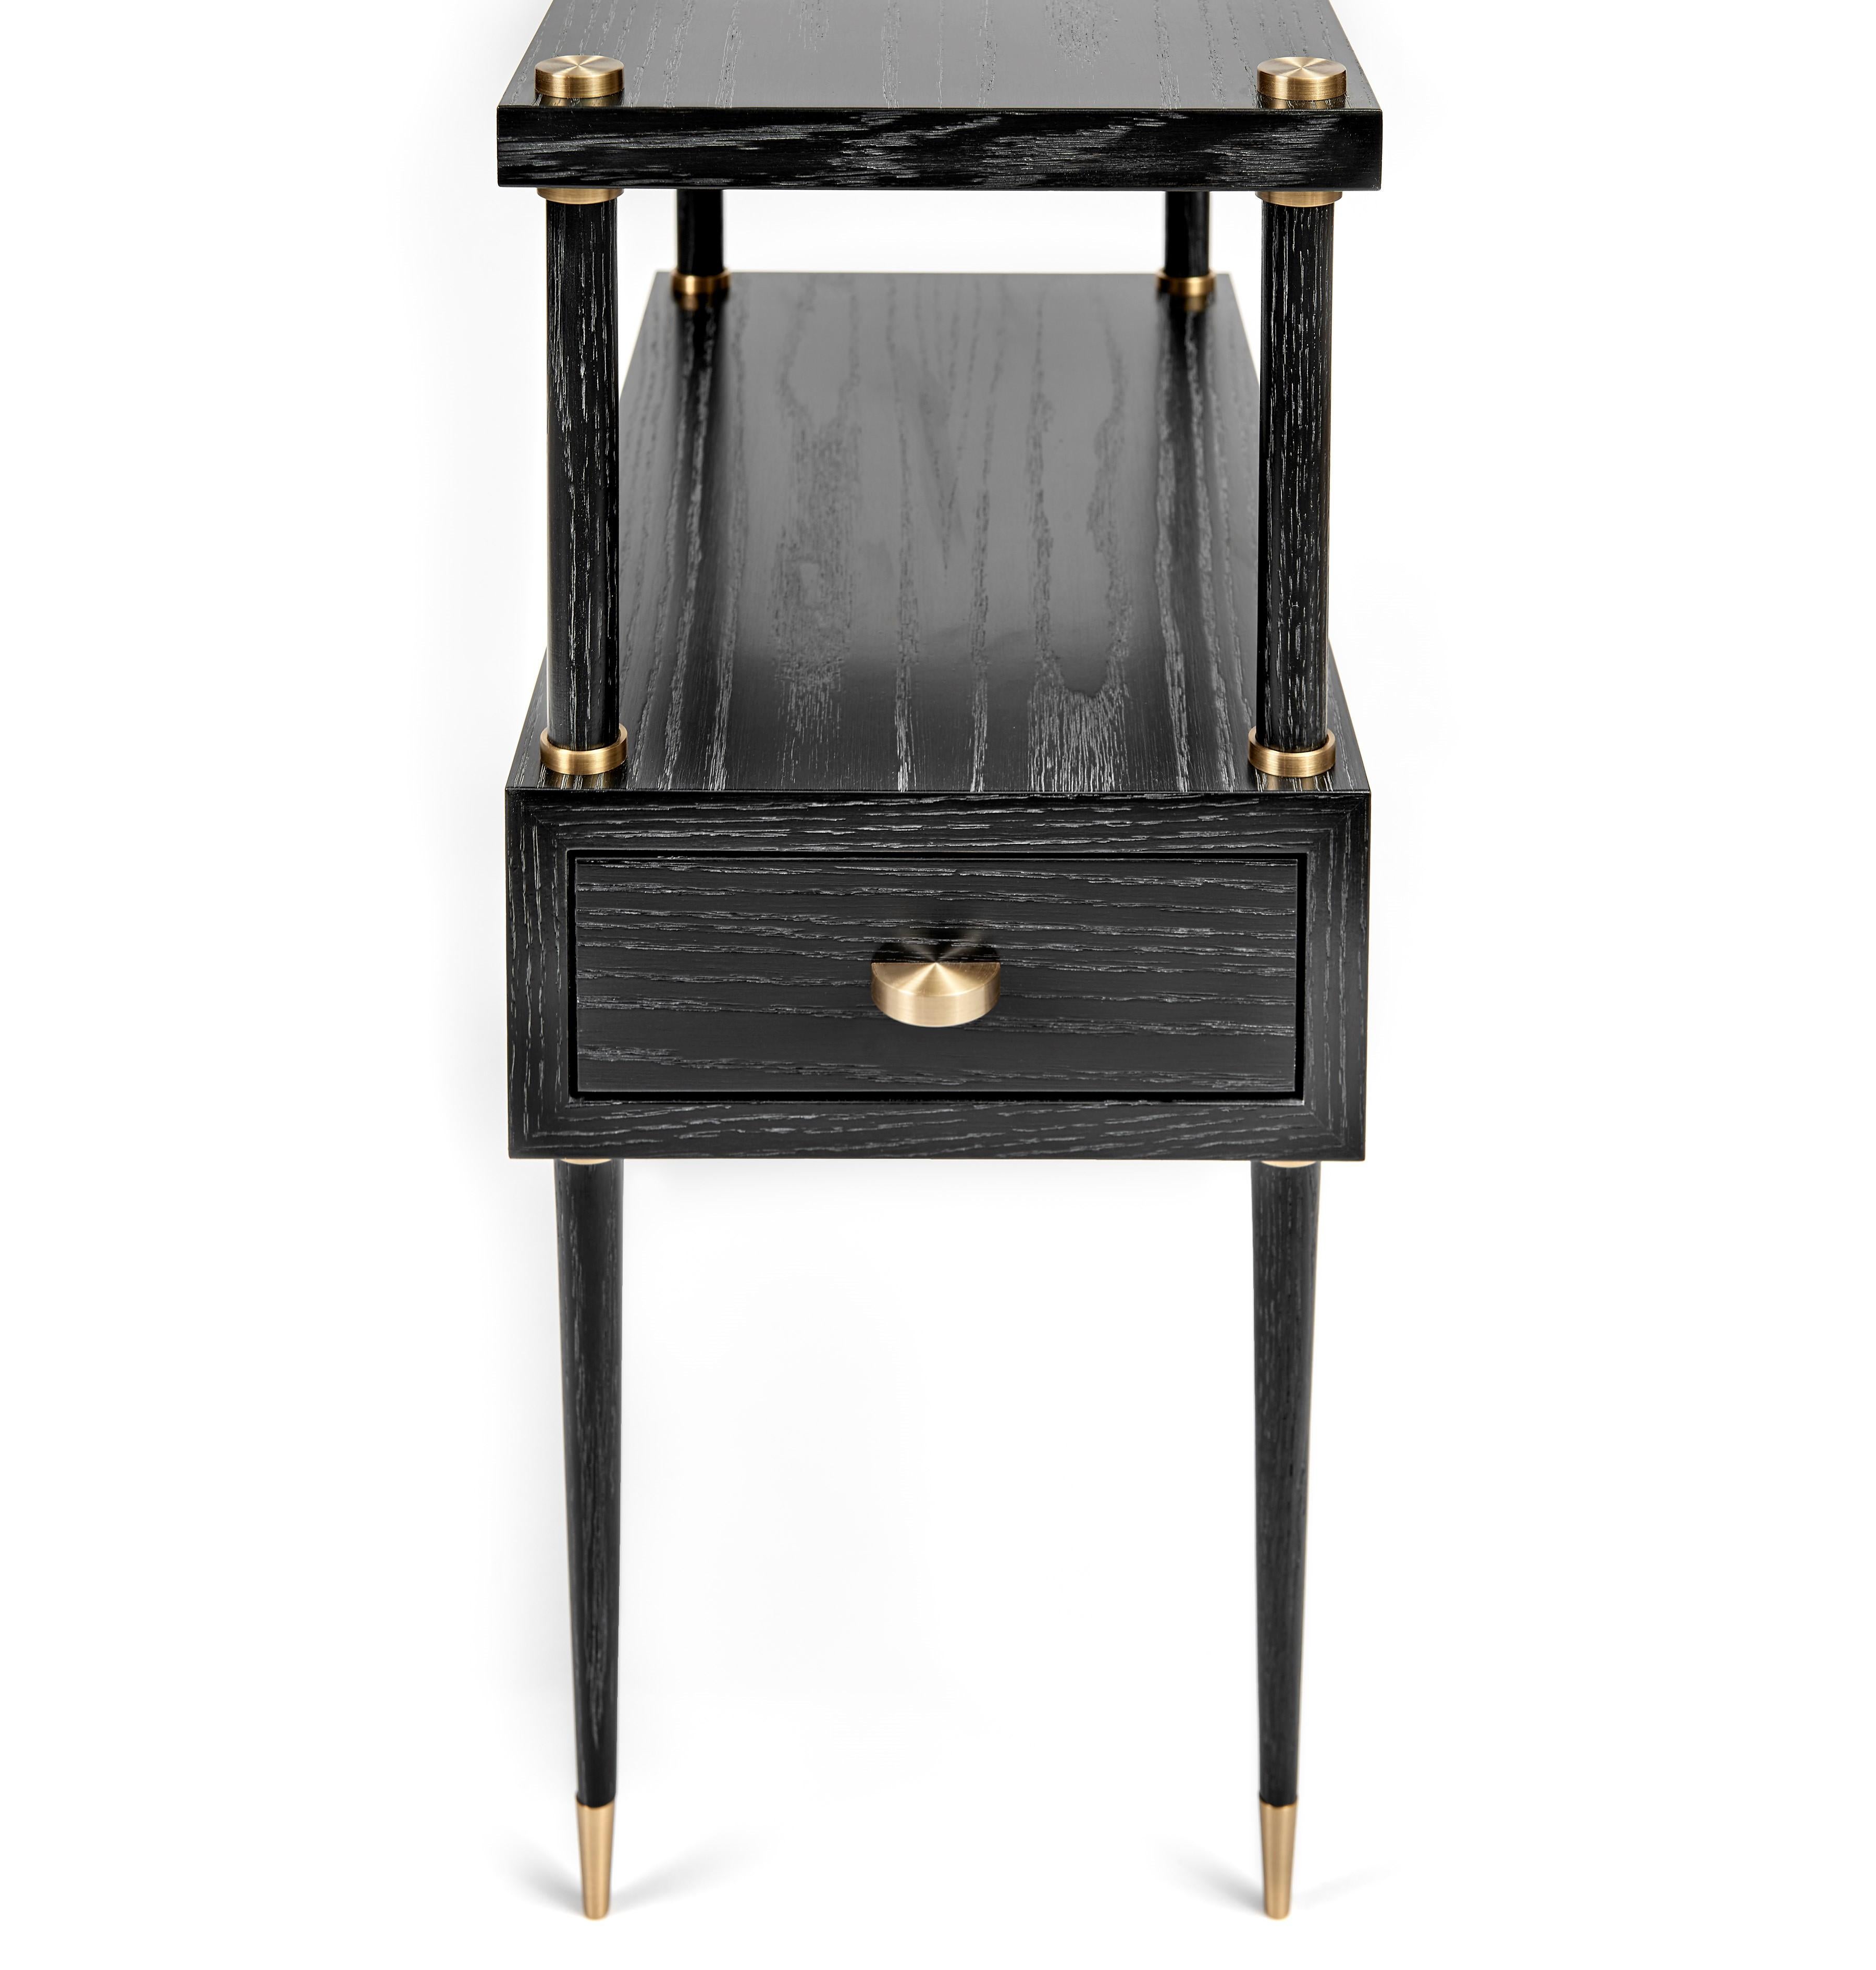 Contemporary black side table with drawer
Dimensions: 20